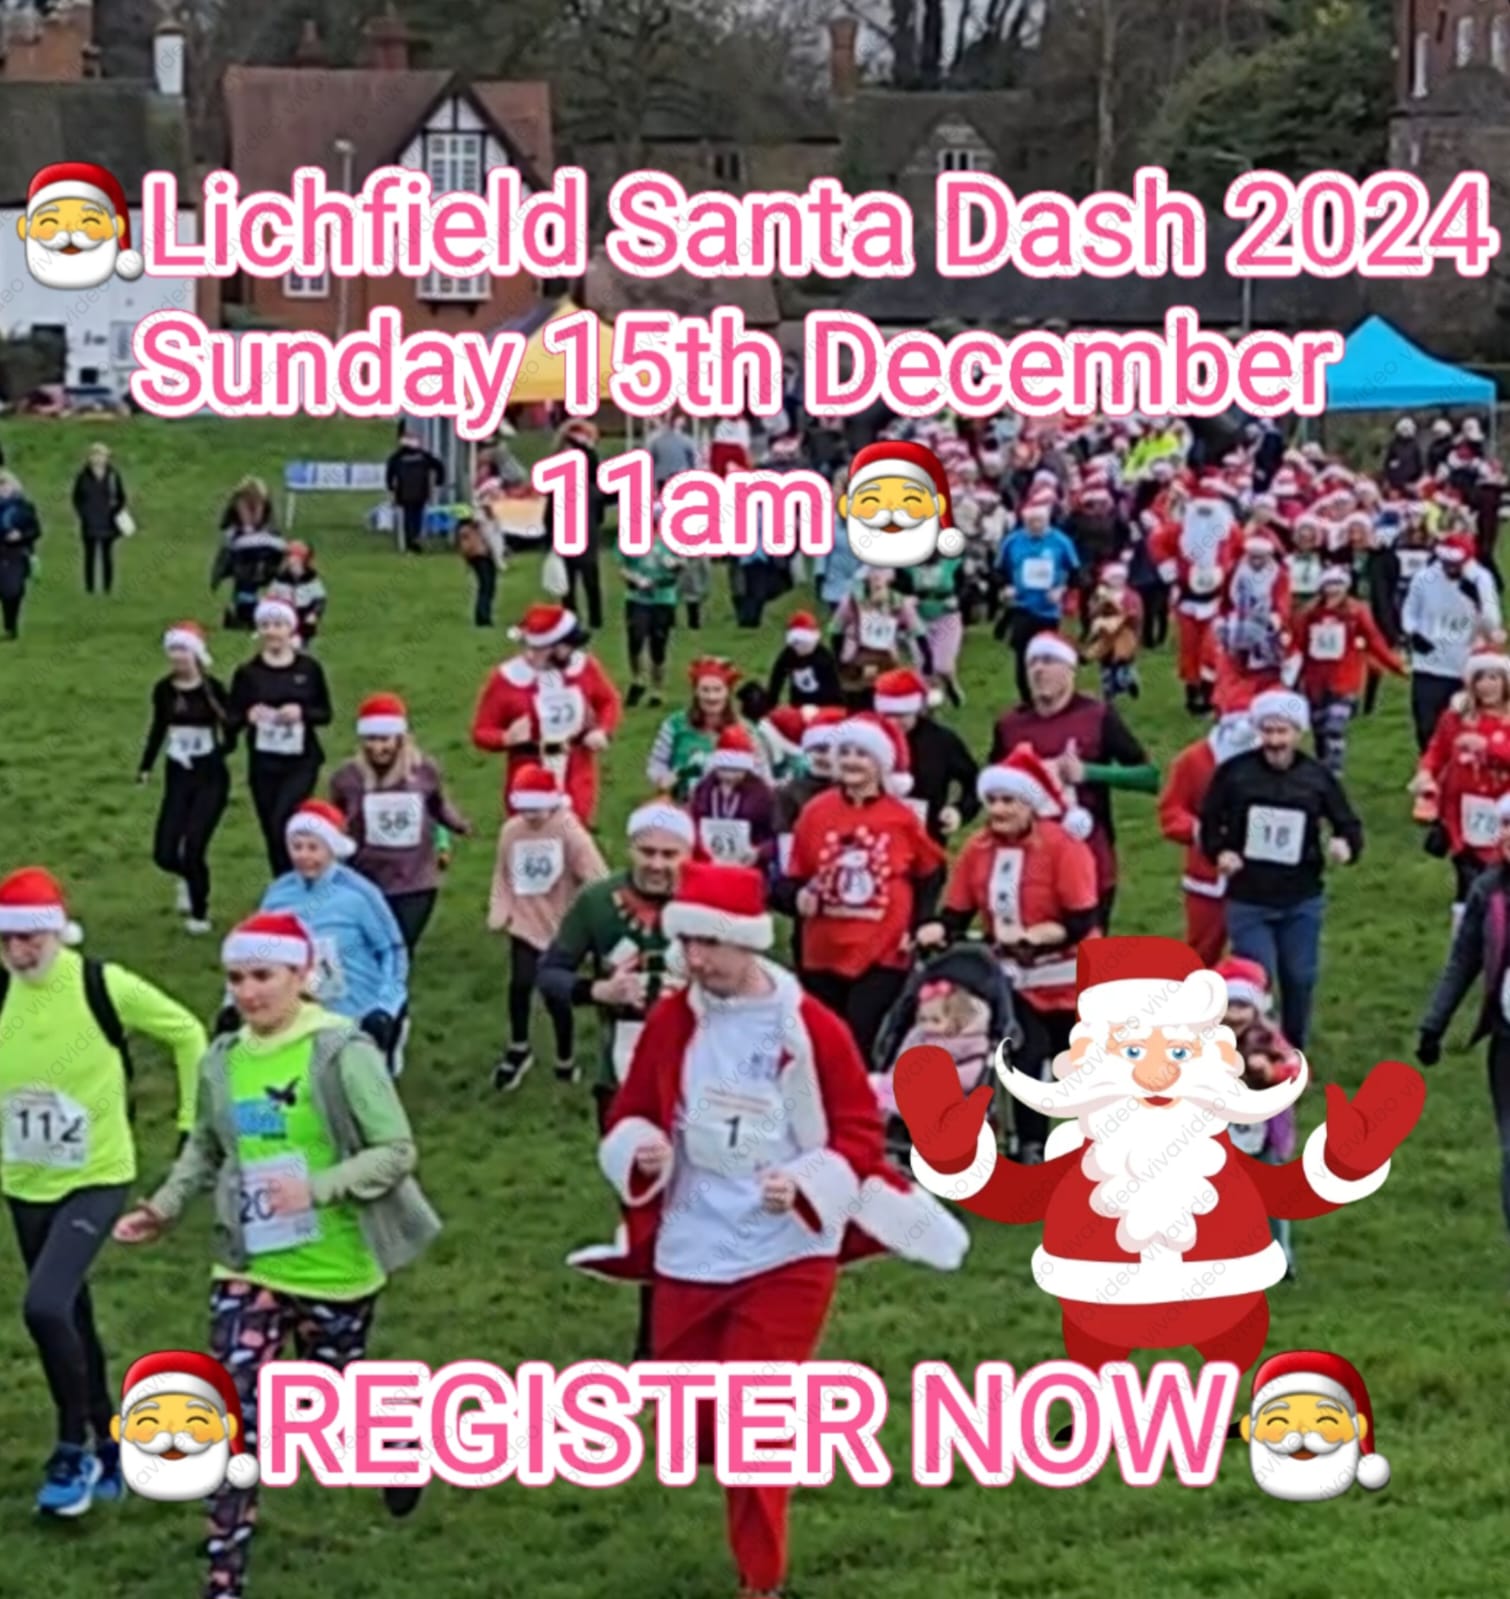 Christmas Kindness Happy Hat Dash in aid of Sebbie Hall Kindness Foundation